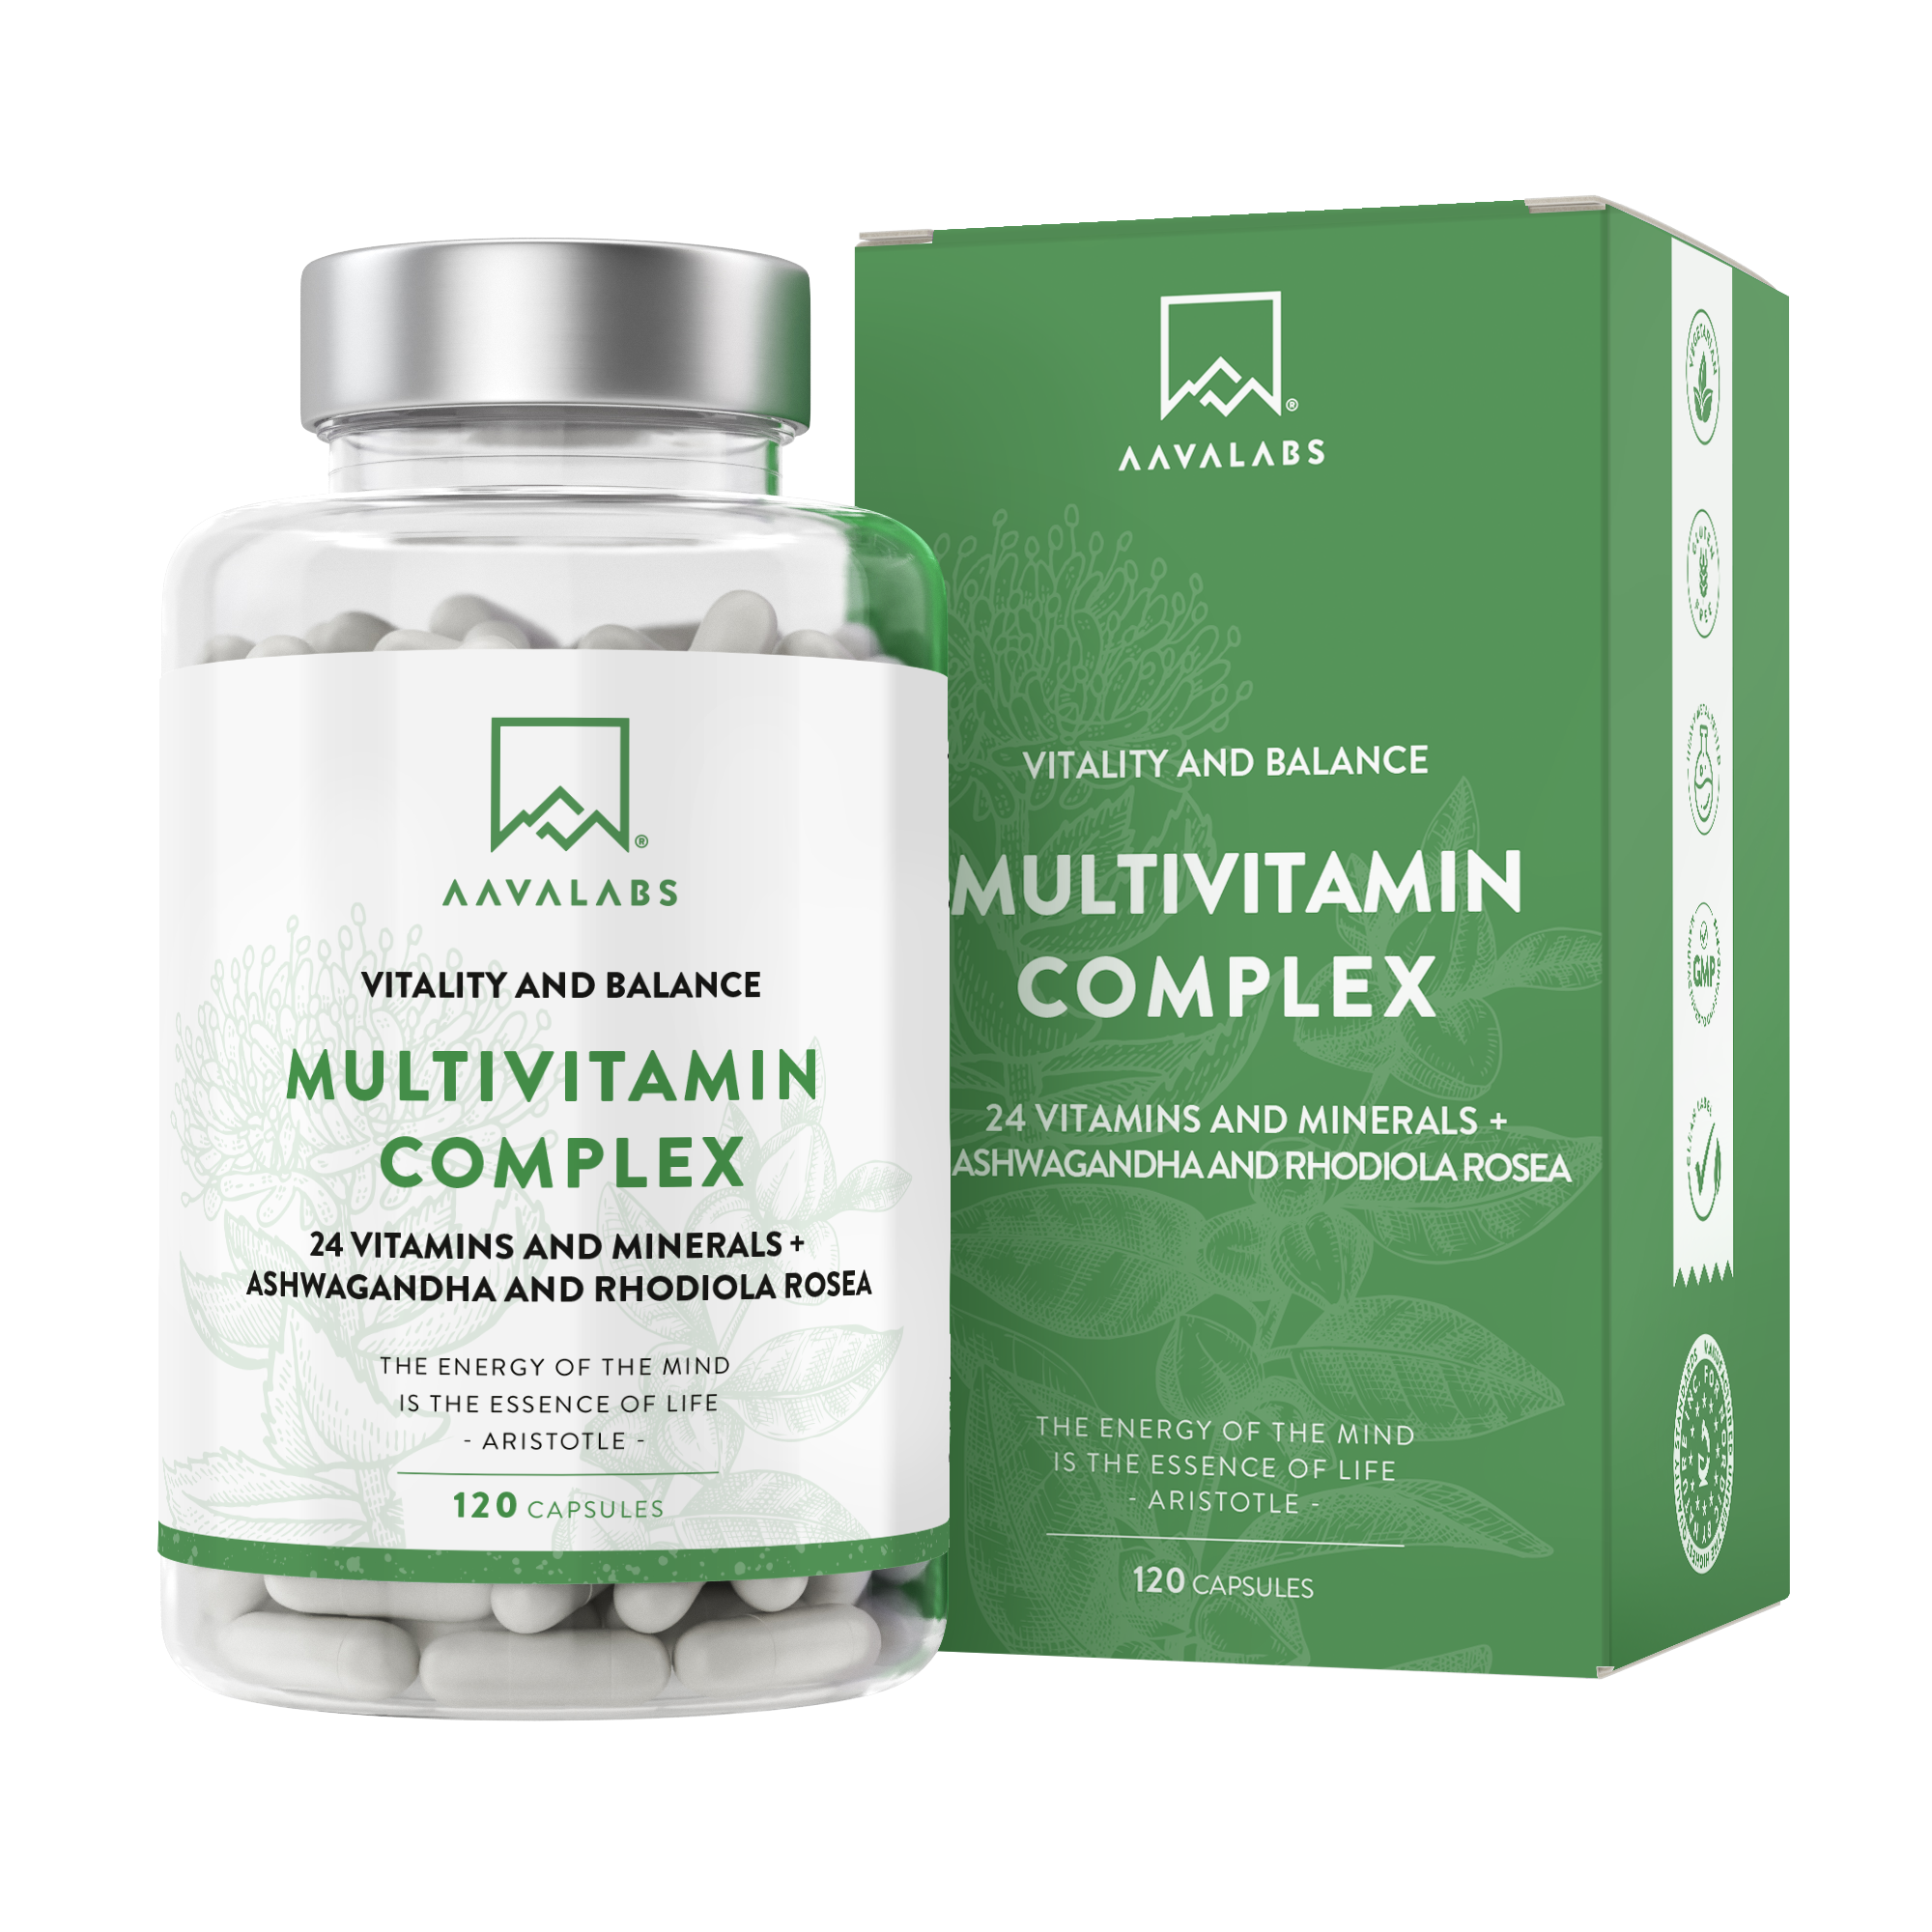 Multivitamin Complex with 24 vitamins and minerals plus Ashwagandha and Rhodiola Rosea for vitality and balance - Aavalabs